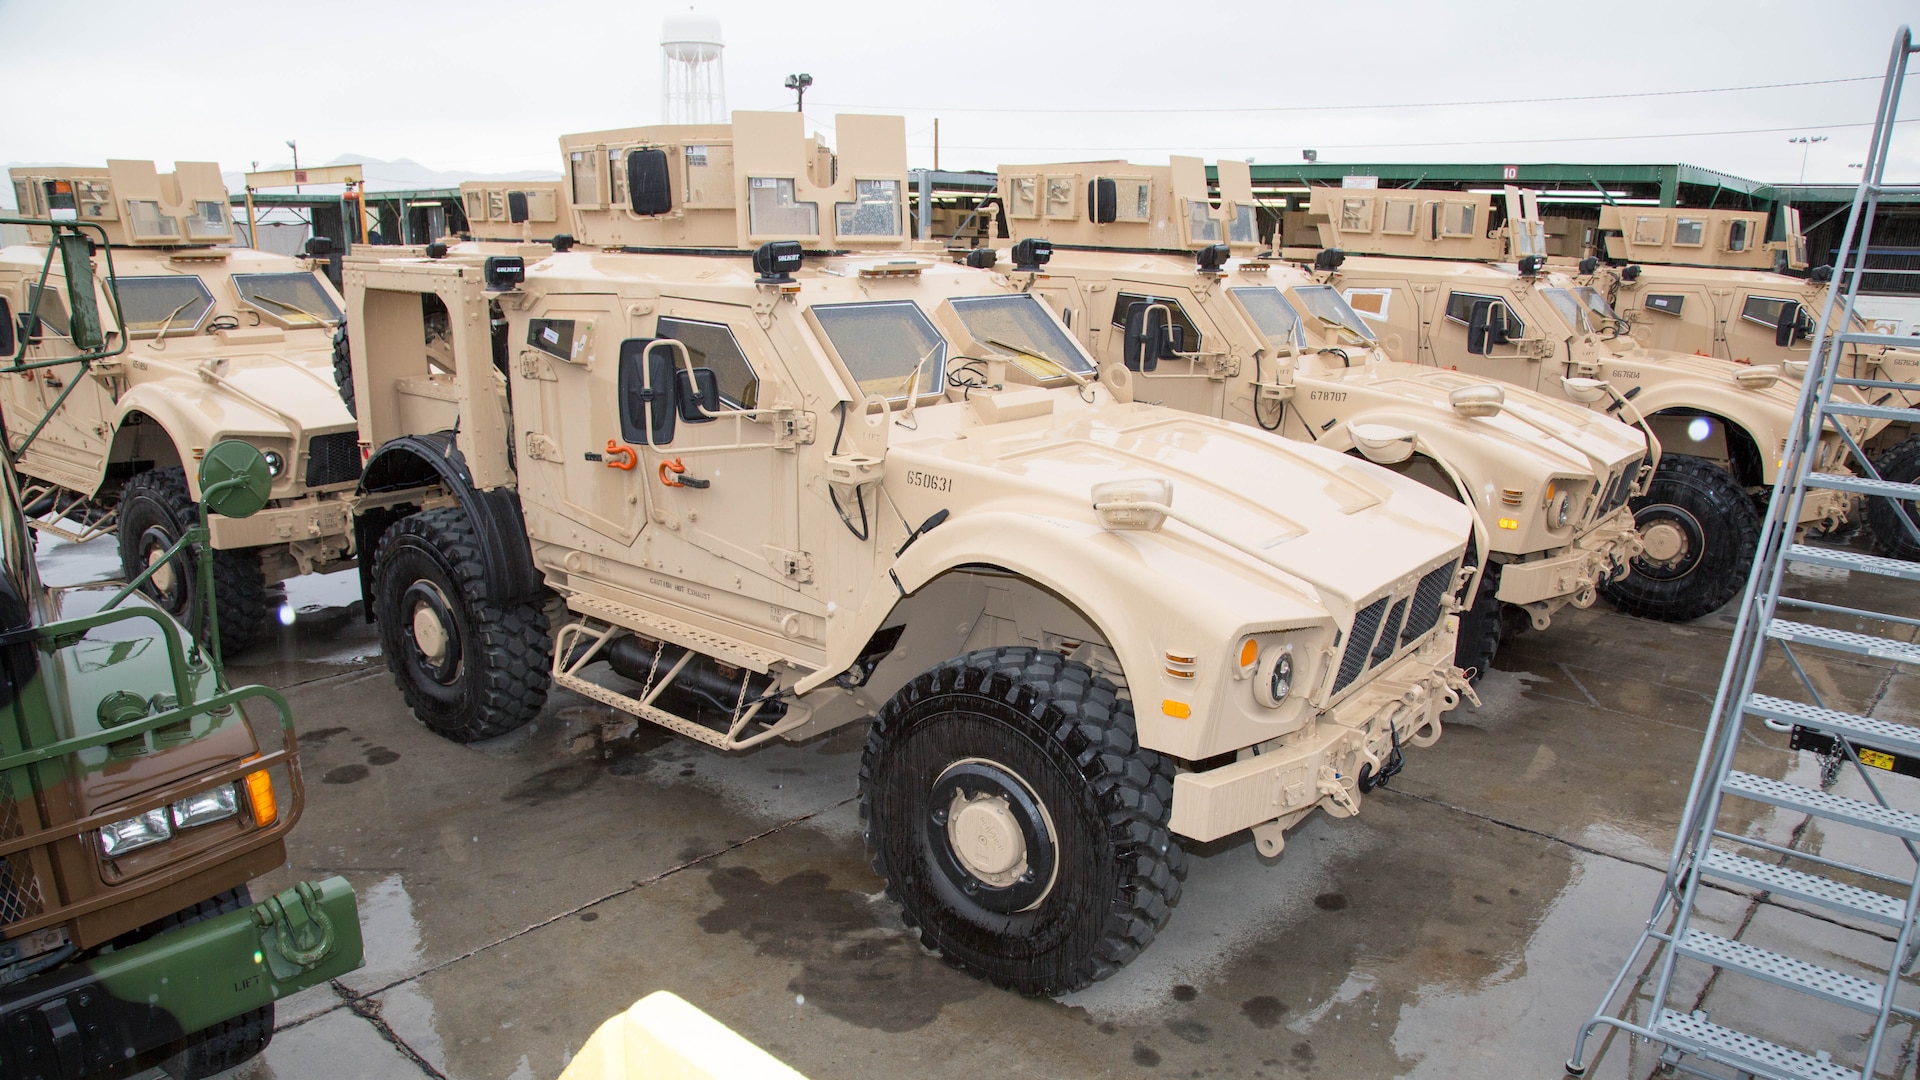 Mine Resistant Ambush Protected All Terrain Vehicles have finished their upgrades, armor improvements and await road testing at Production Plant Barstow, Marine Depot Maintenance Command, on the Yermo Annex of Marine Corps Logistics Base Barstow, California, Jan. 12, 2017. The specialized vehicles are favored for troop transporting in the mountainous country of Afghanistan. The turret atop the M-ATV marks this as a Marine Corps variant of the MRAP.